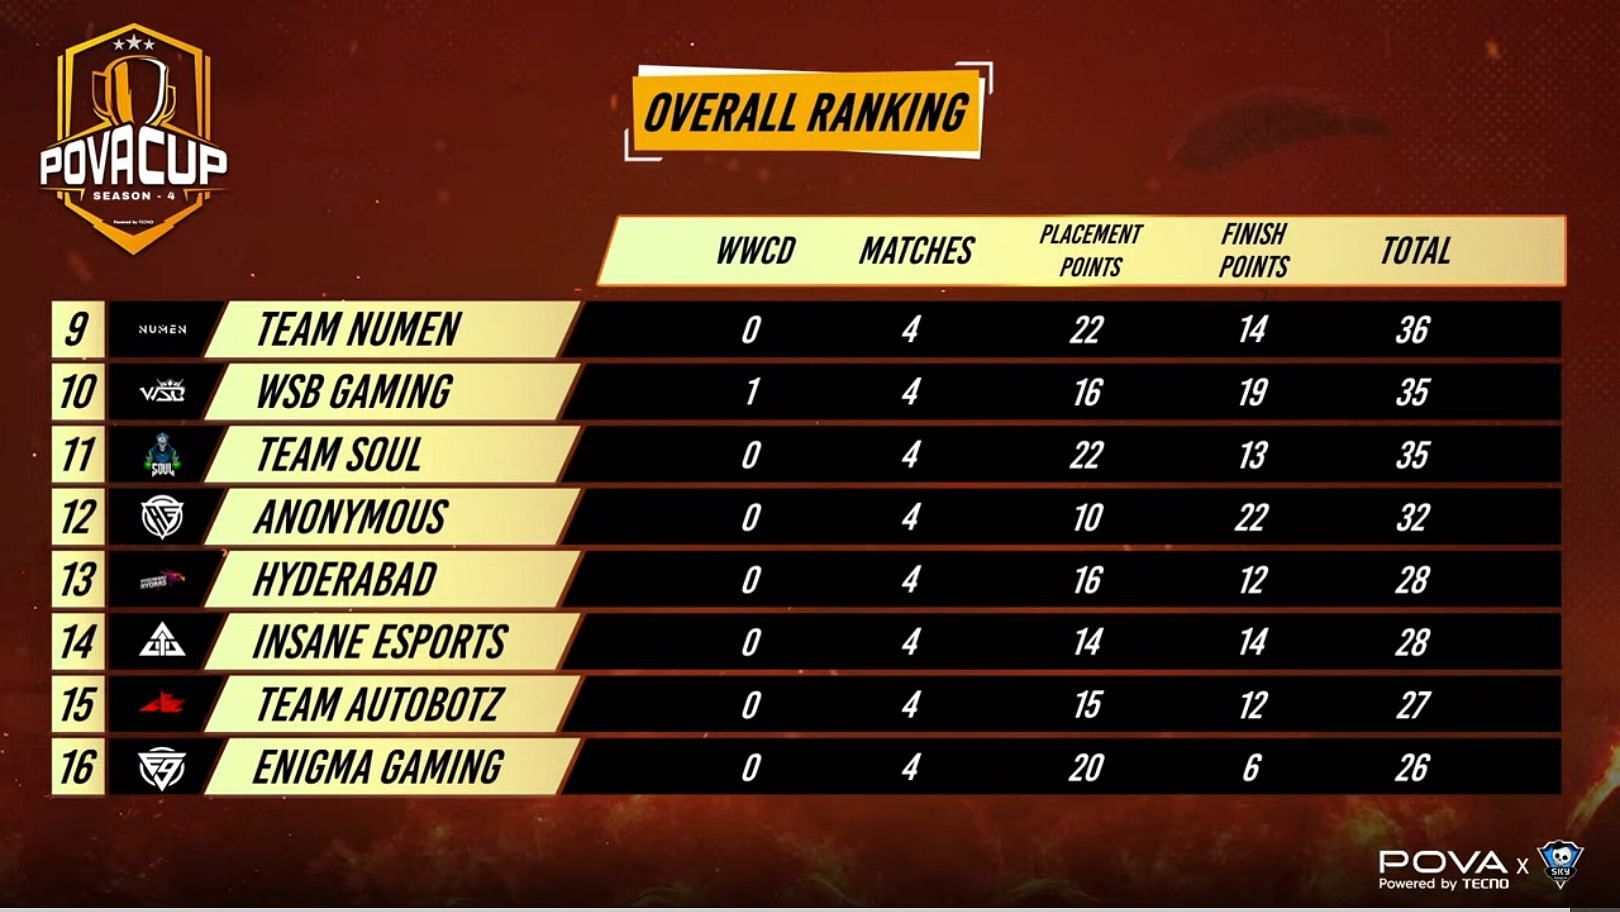 Team Soul earned the 11th spot after four matches (Image via Skyesports)